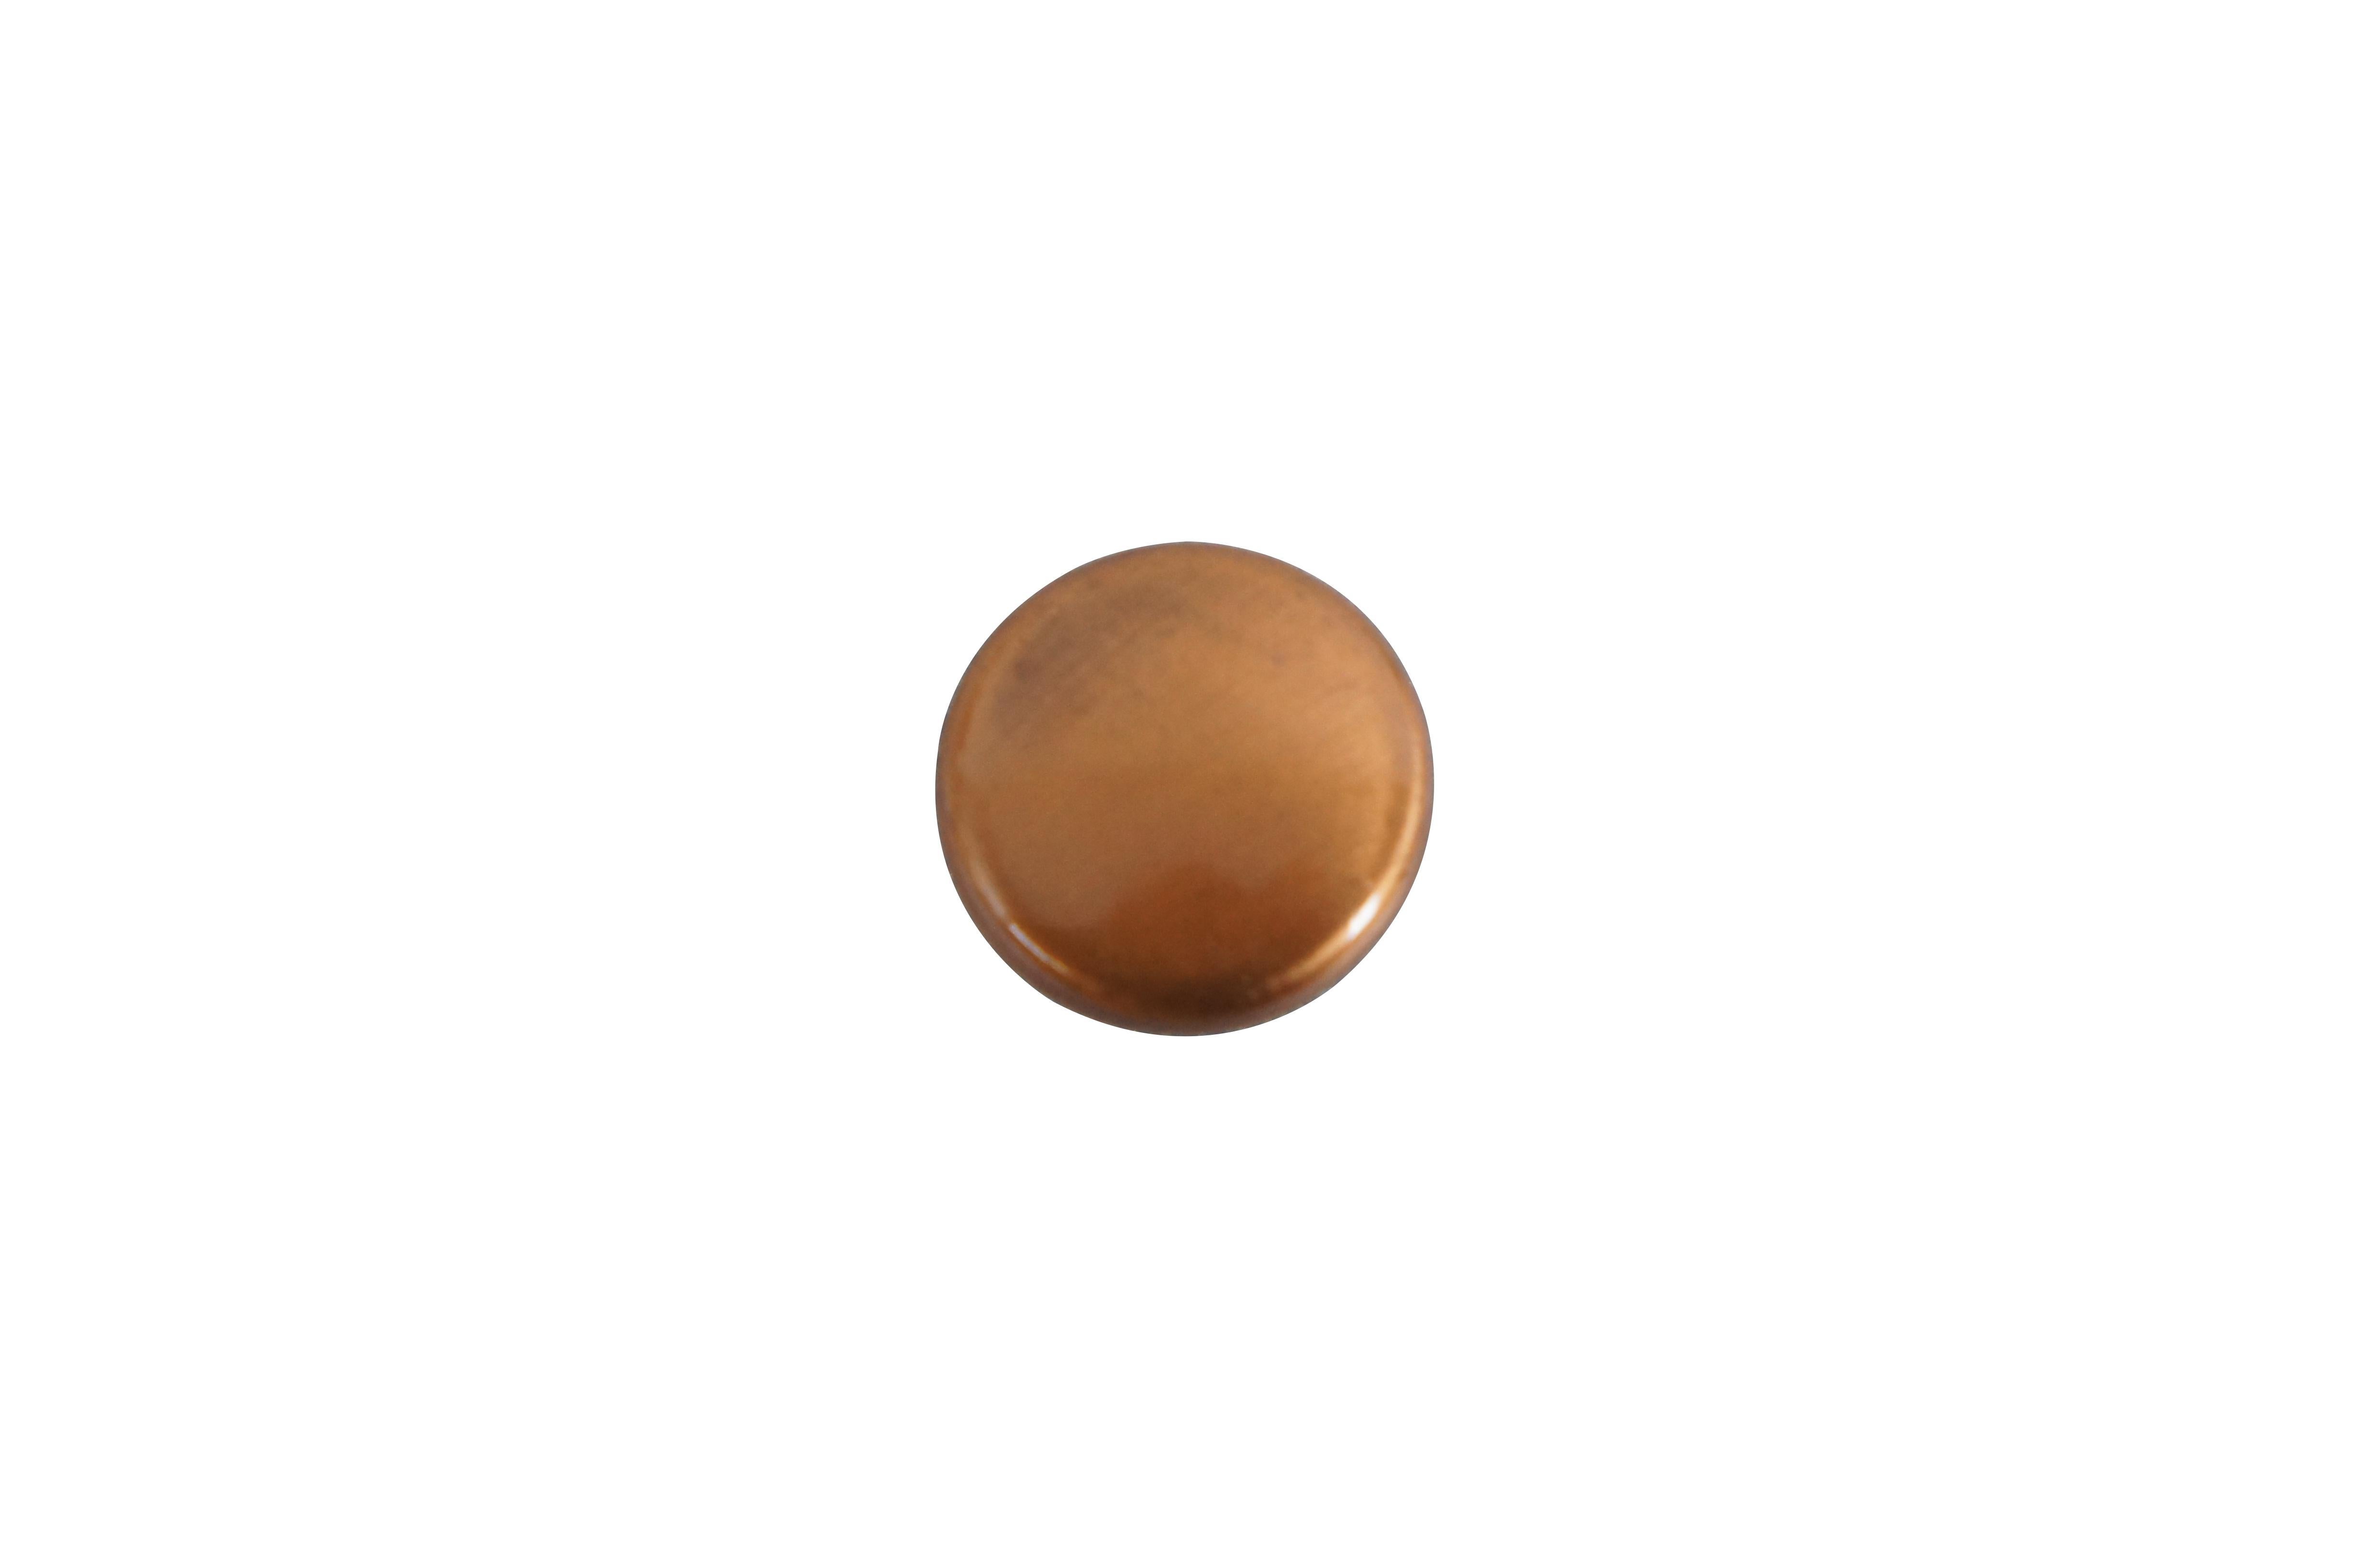 62 Available - Mid to late 20th century old-stock die cast drawer / cabinet pulls. National Lock Company - Medalist. Brushed copper finish. Round shape with tapered back and black cap.

DIMENSIONS:
1